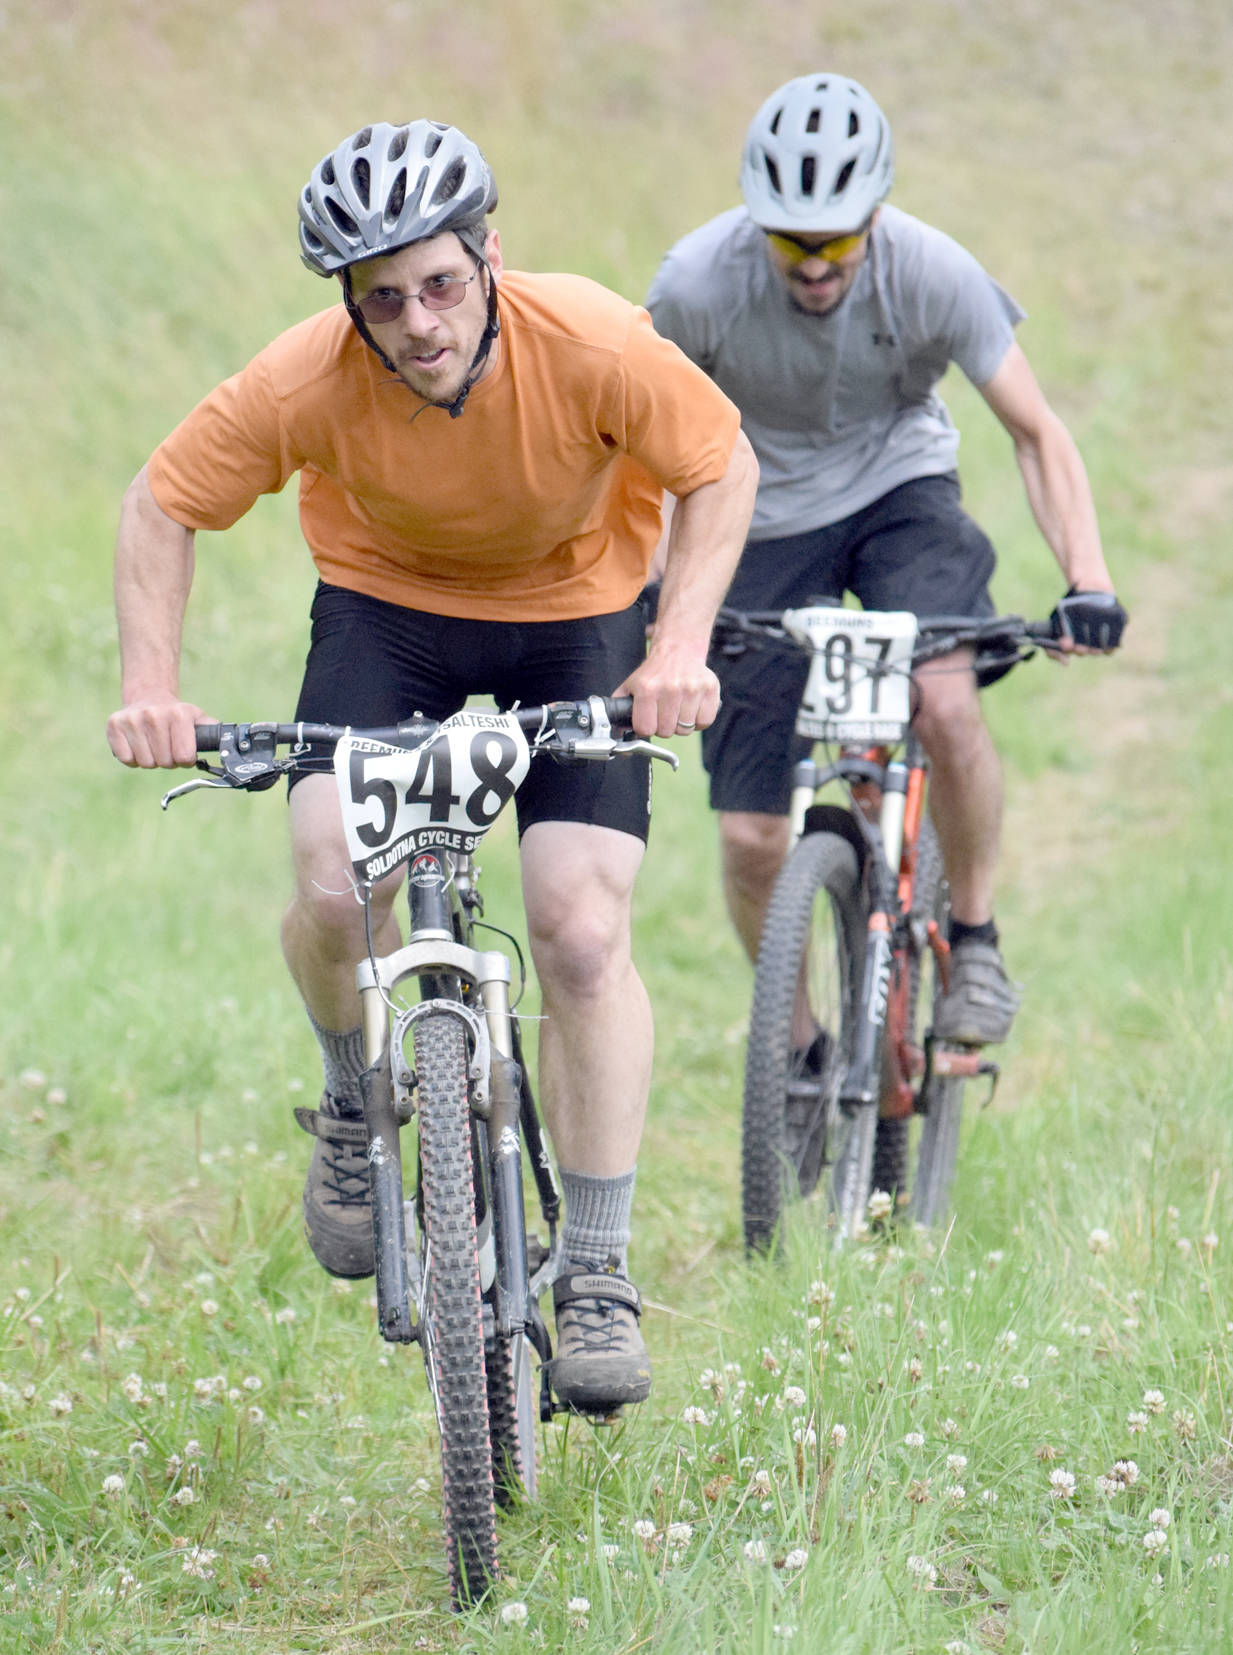 Matthew Dura leads Nathan Kincaid up the final climb in the 10-kilometer Soldotna Cycle Series Race 6, held Thursday, Aug. 3, 2017, at Tsalteshi Trails. Dura would finish fourth, while Kincaid would finish a second behind. (Photo by Jeff Helminiak/Peninsula Clarion)